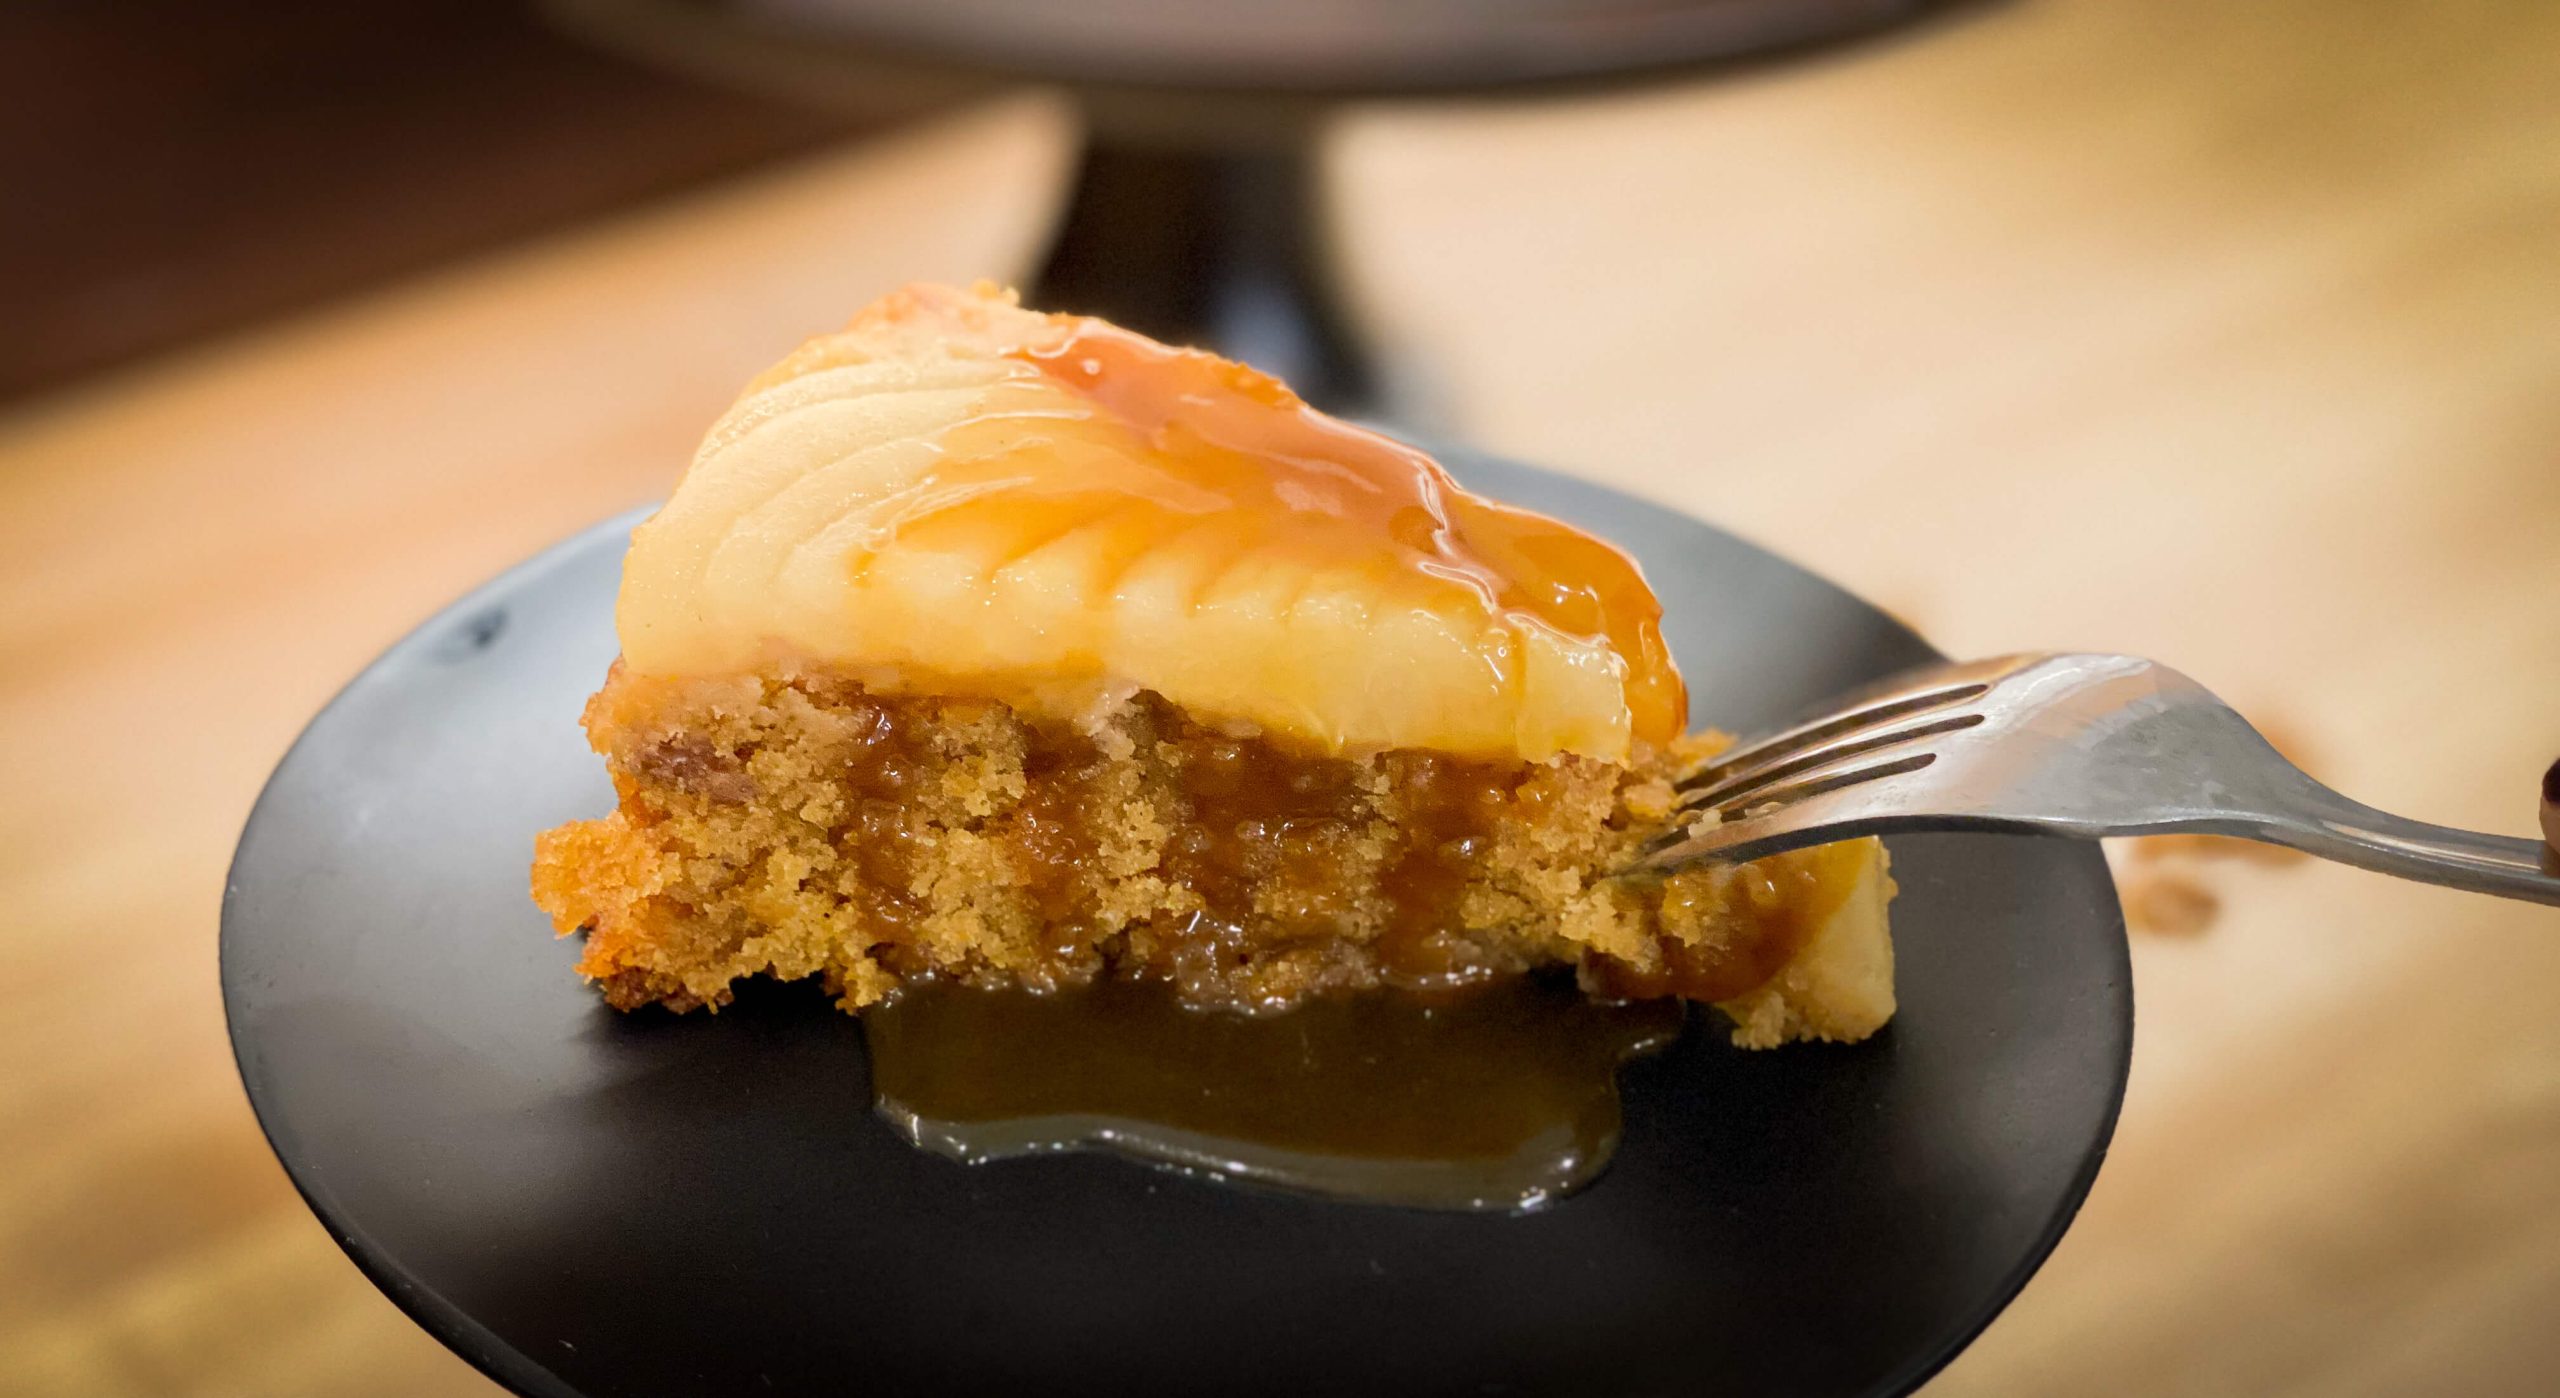 upside down pear cake with caramel sauce